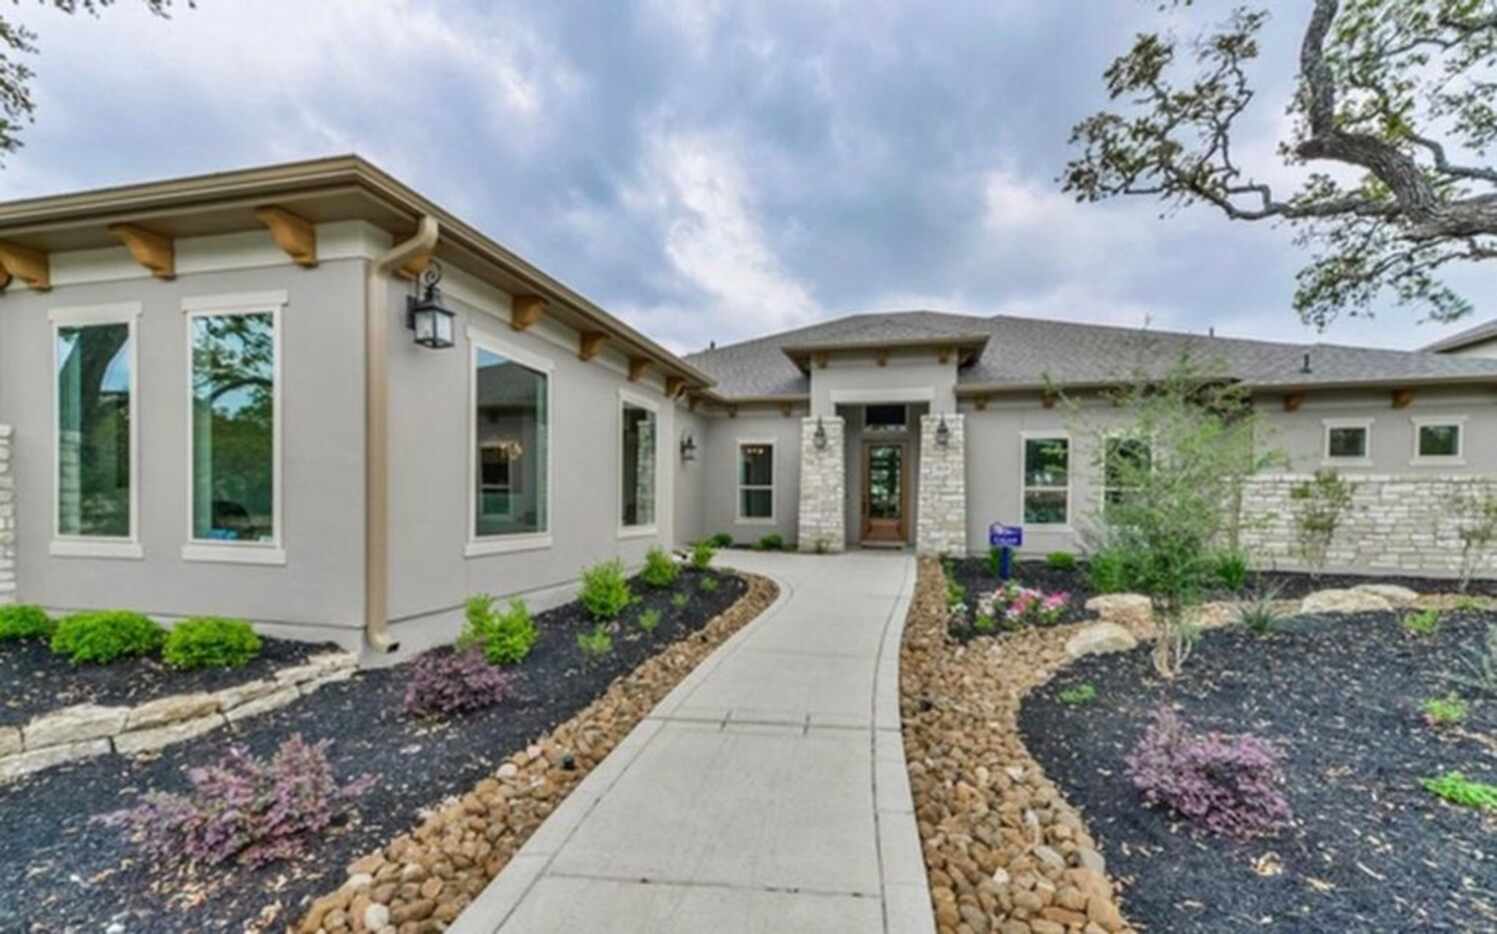 A look at the Luxurious Home in Bulverde listing on VRBO.